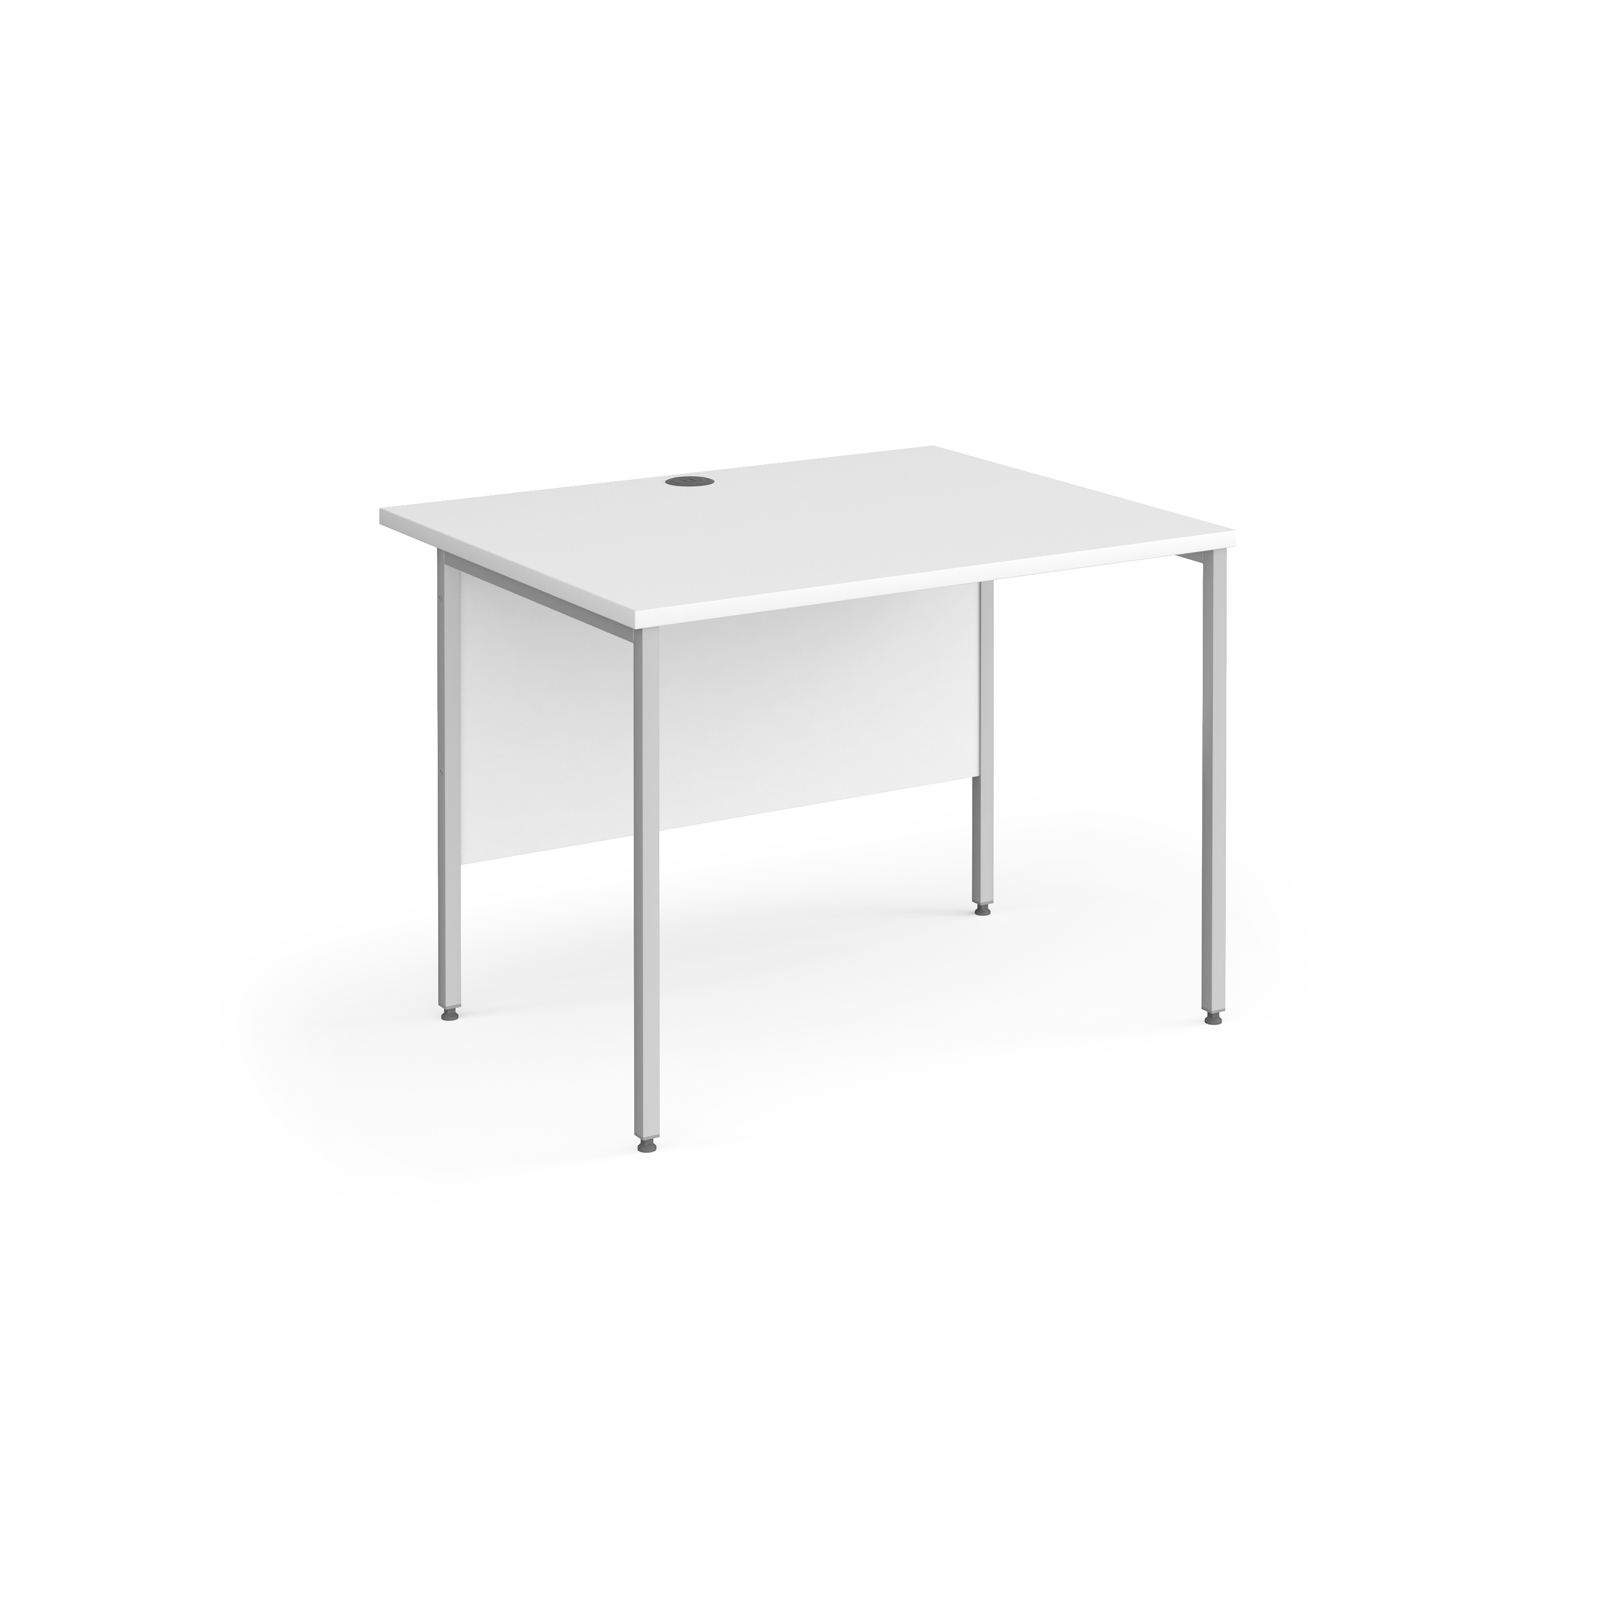 Rectangular Desks Contract 25 straight desk with silver H-Frame leg 1000mm x 800mm - white top